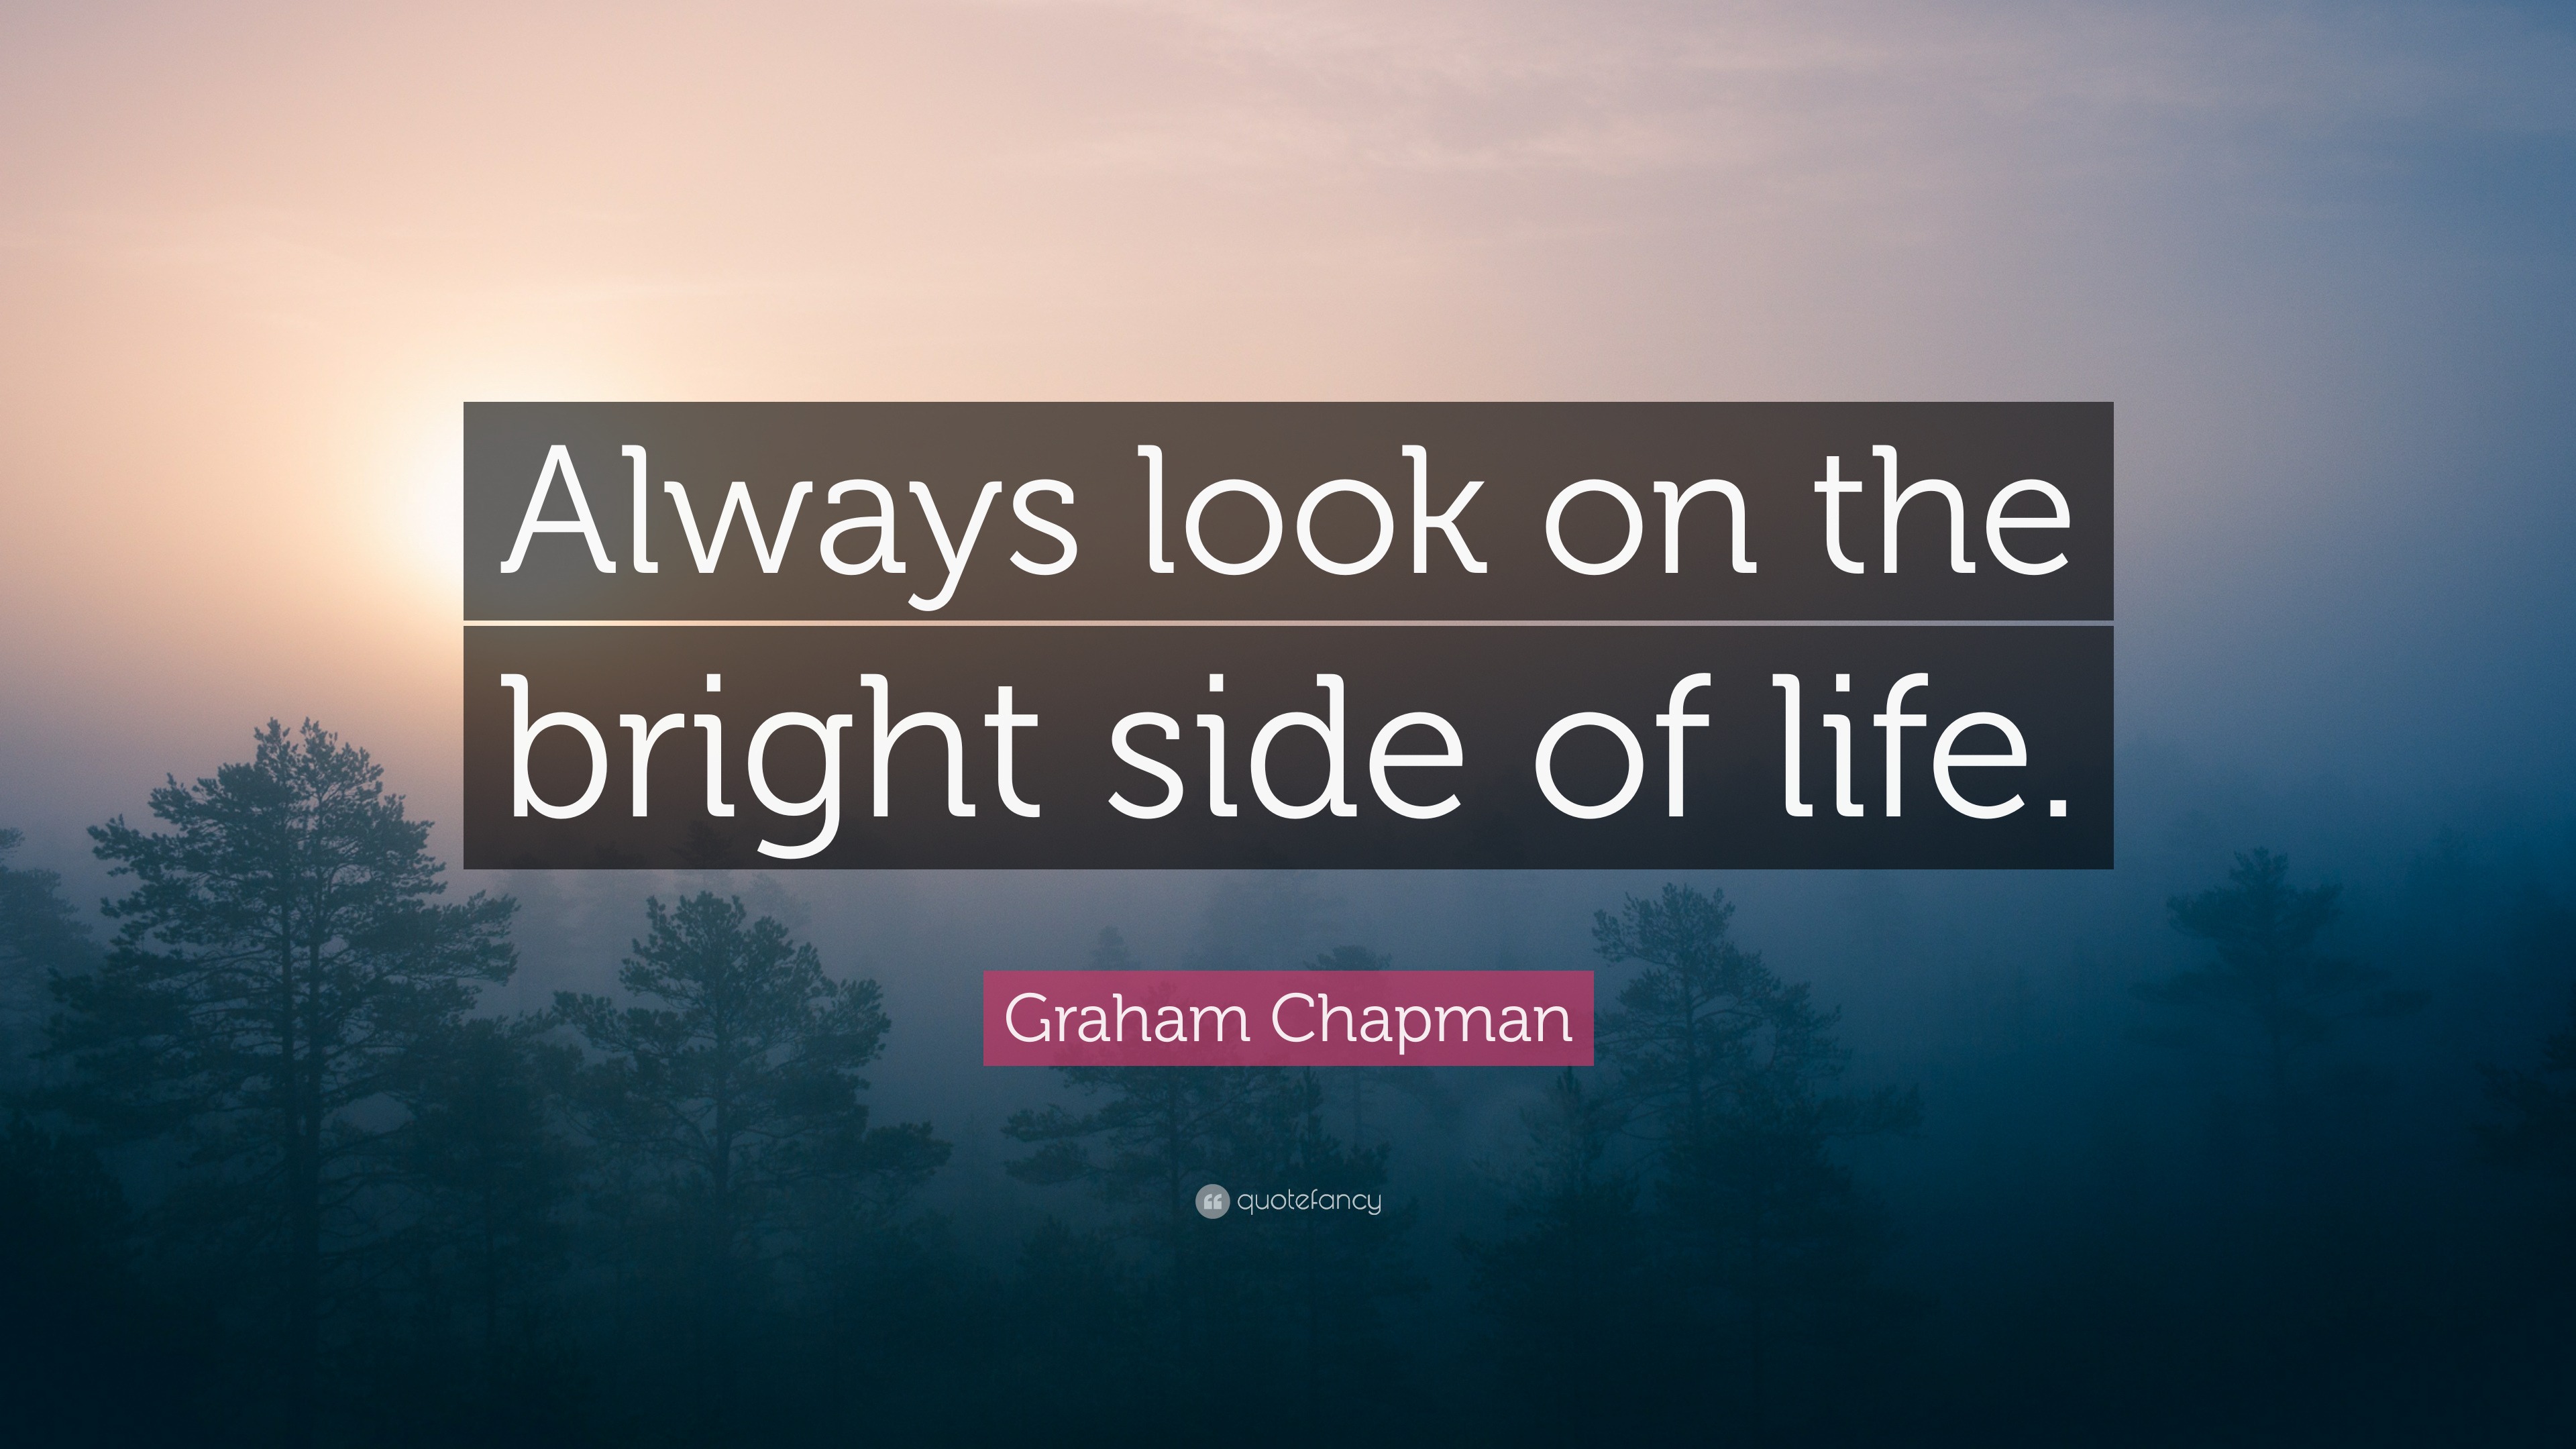 Graham Chapman Quote: "Always look on the bright side of ...